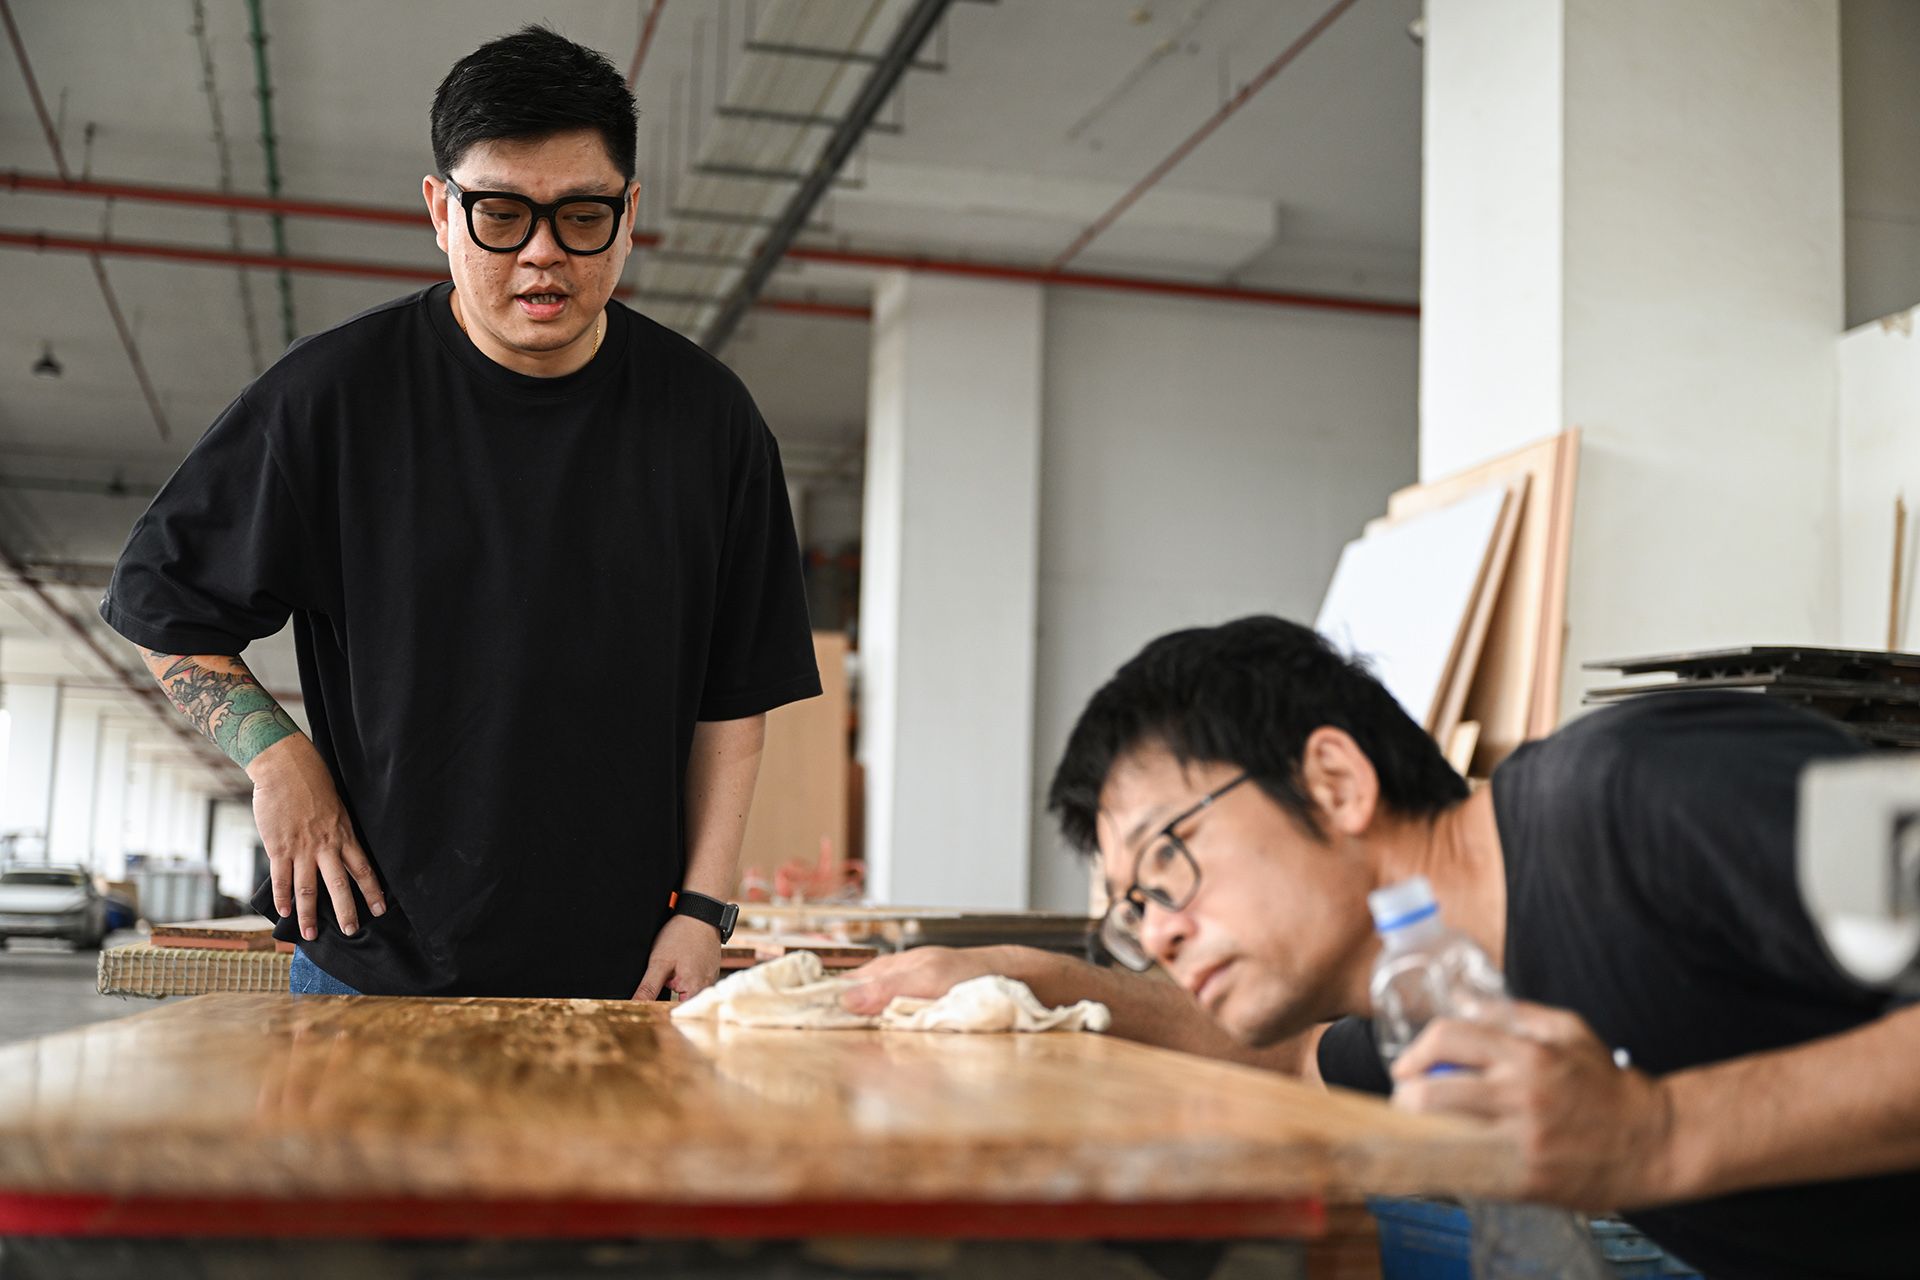 Mr Justin Lee inspecting an end product as Mr Zheng Liangqi finishes the surface with lacquer.